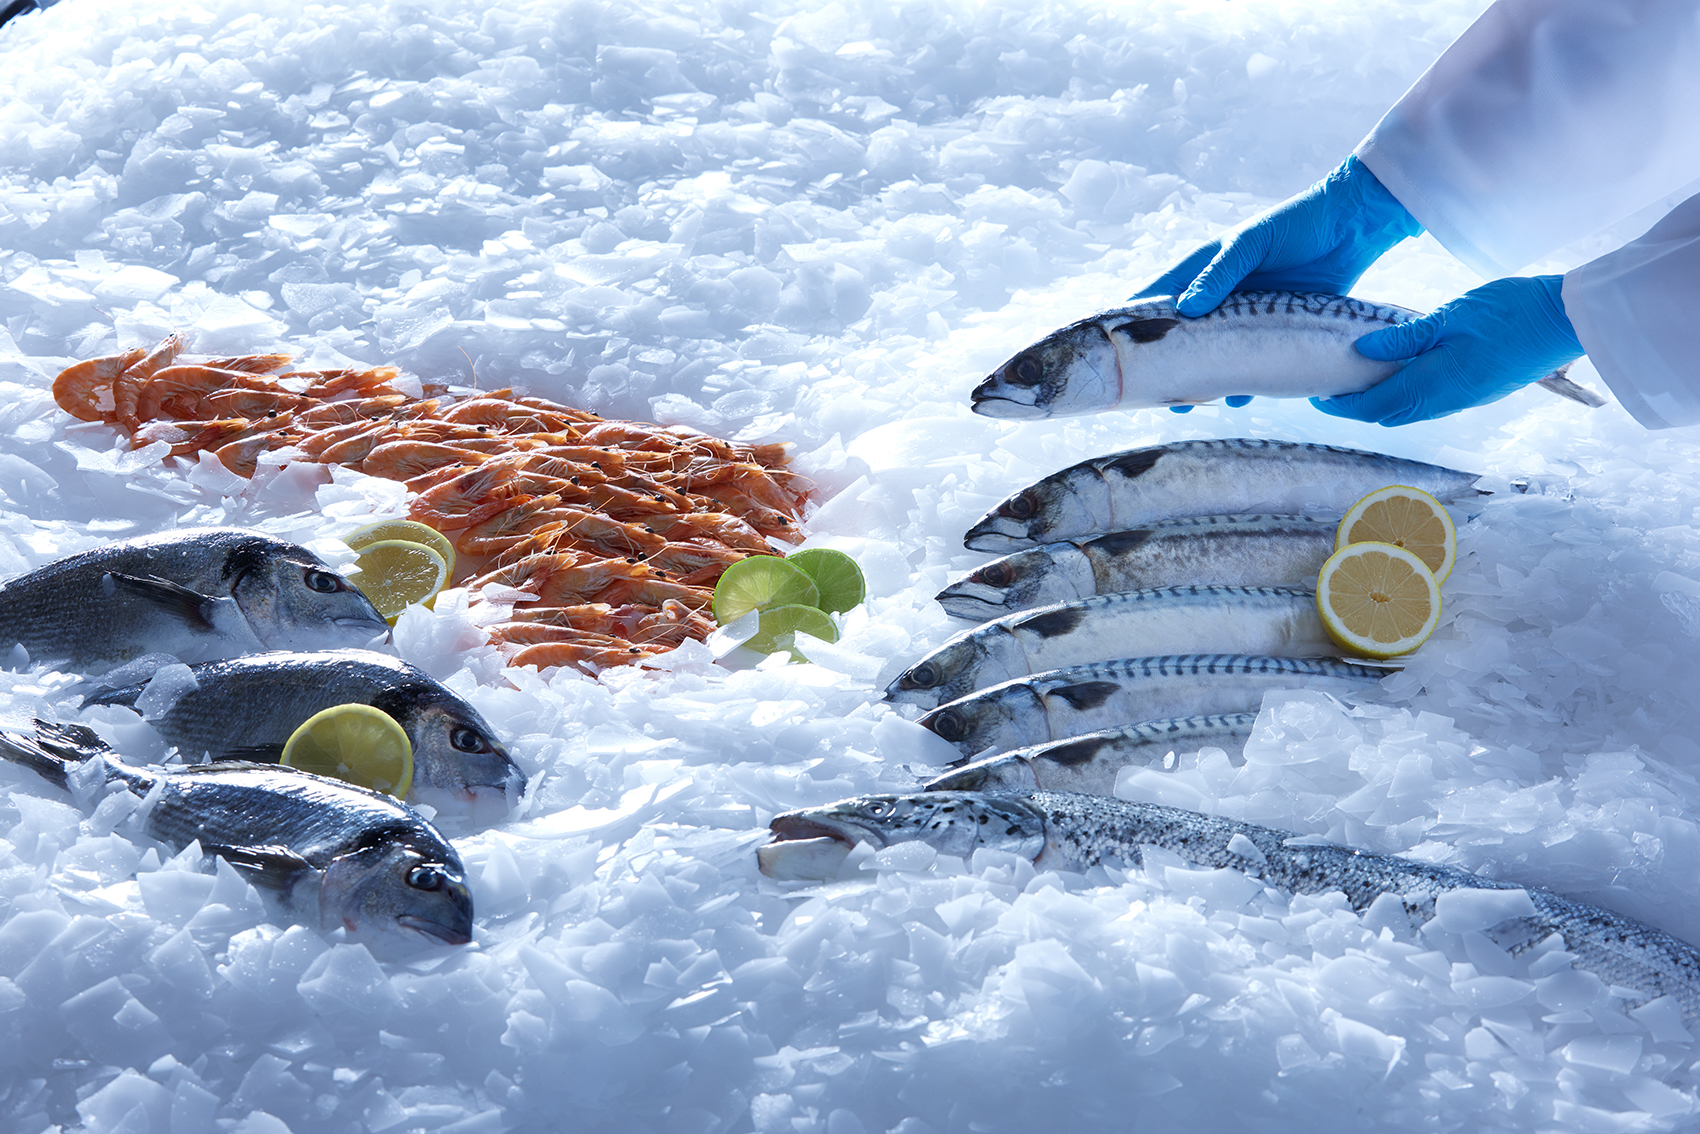 Fresh fish and seafood for retail flake ice display using flake ice from a MAJA flake ice machine for fish